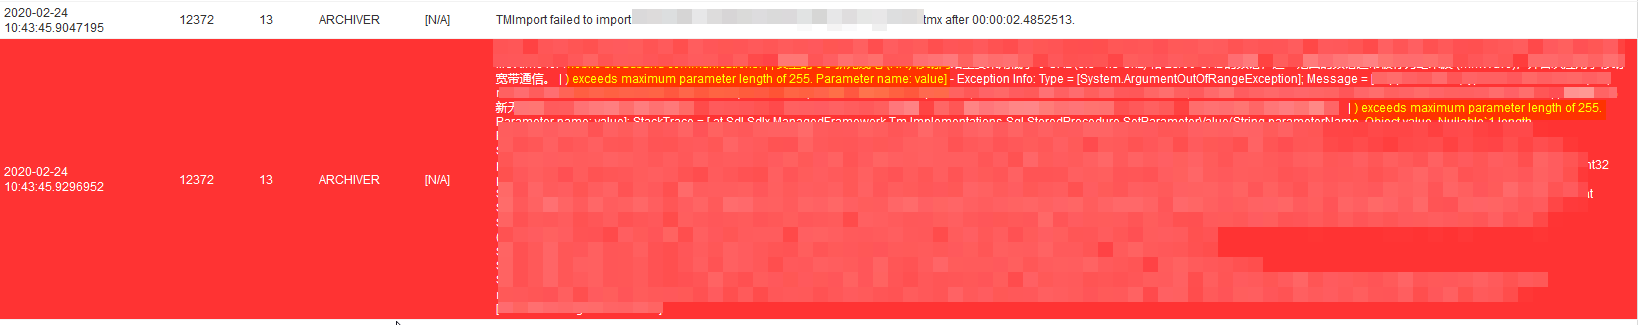 TMS log entry showing error